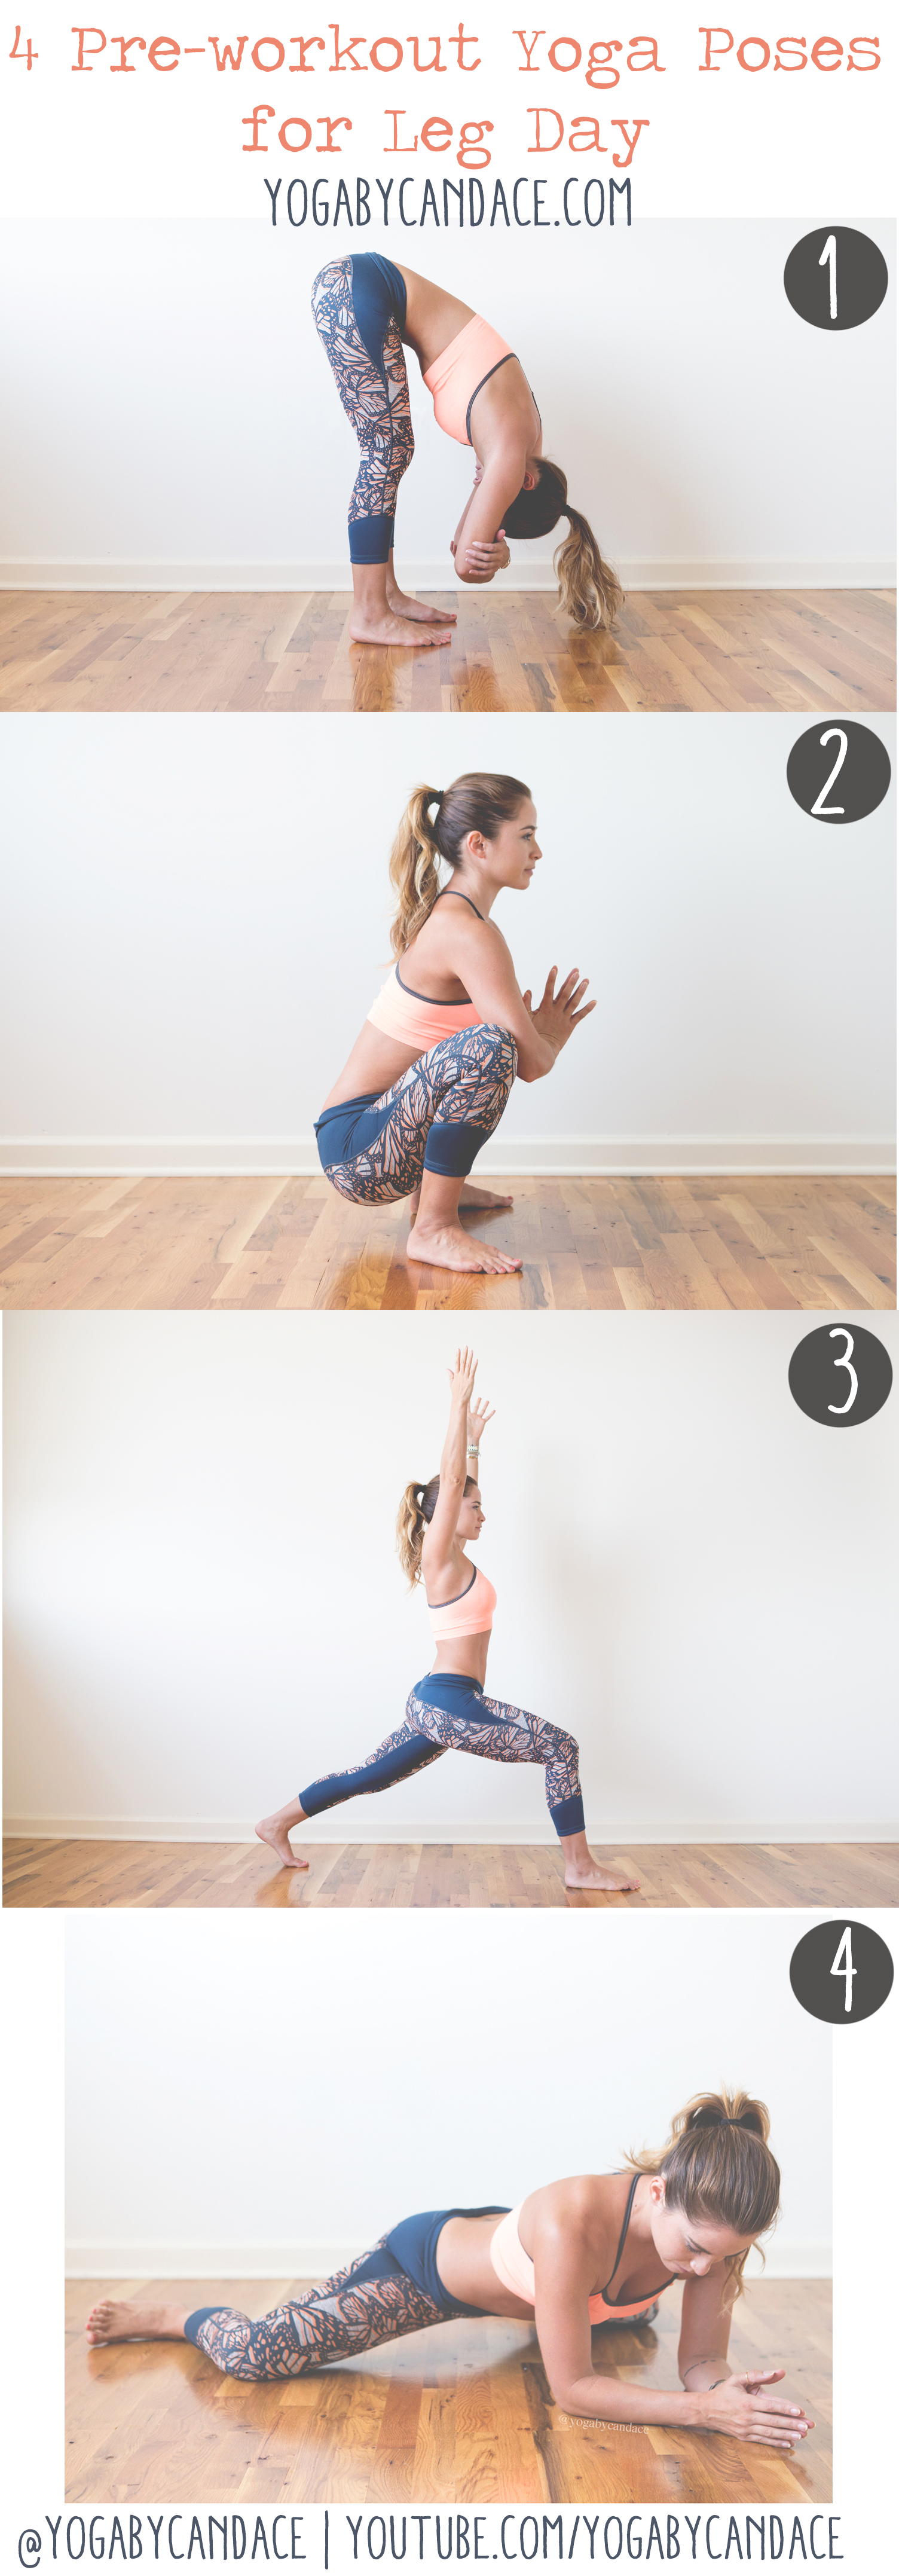 Yoga Poses For Those Sculpted Abs! - Blog - HealthifyMe